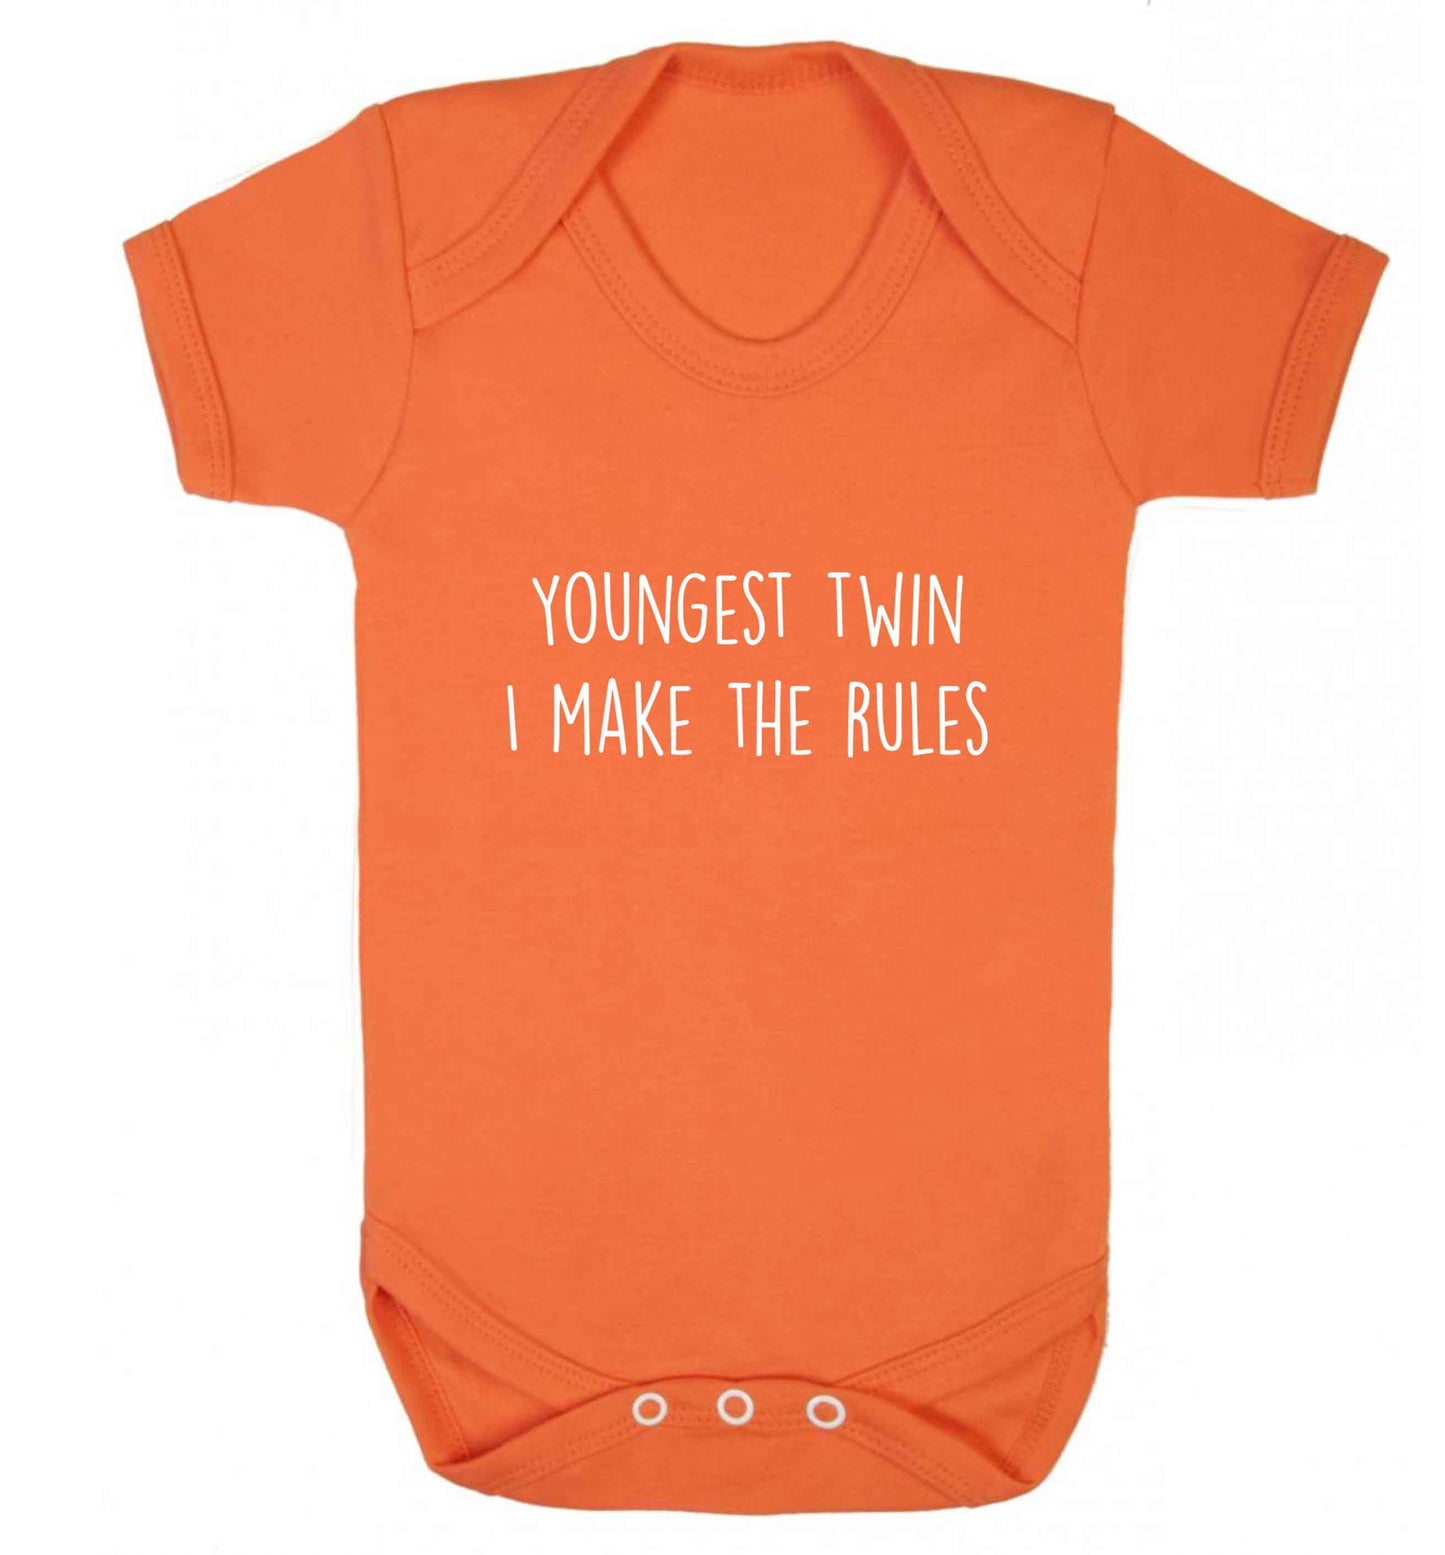 Youngest twin I make the rules baby vest orange 18-24 months